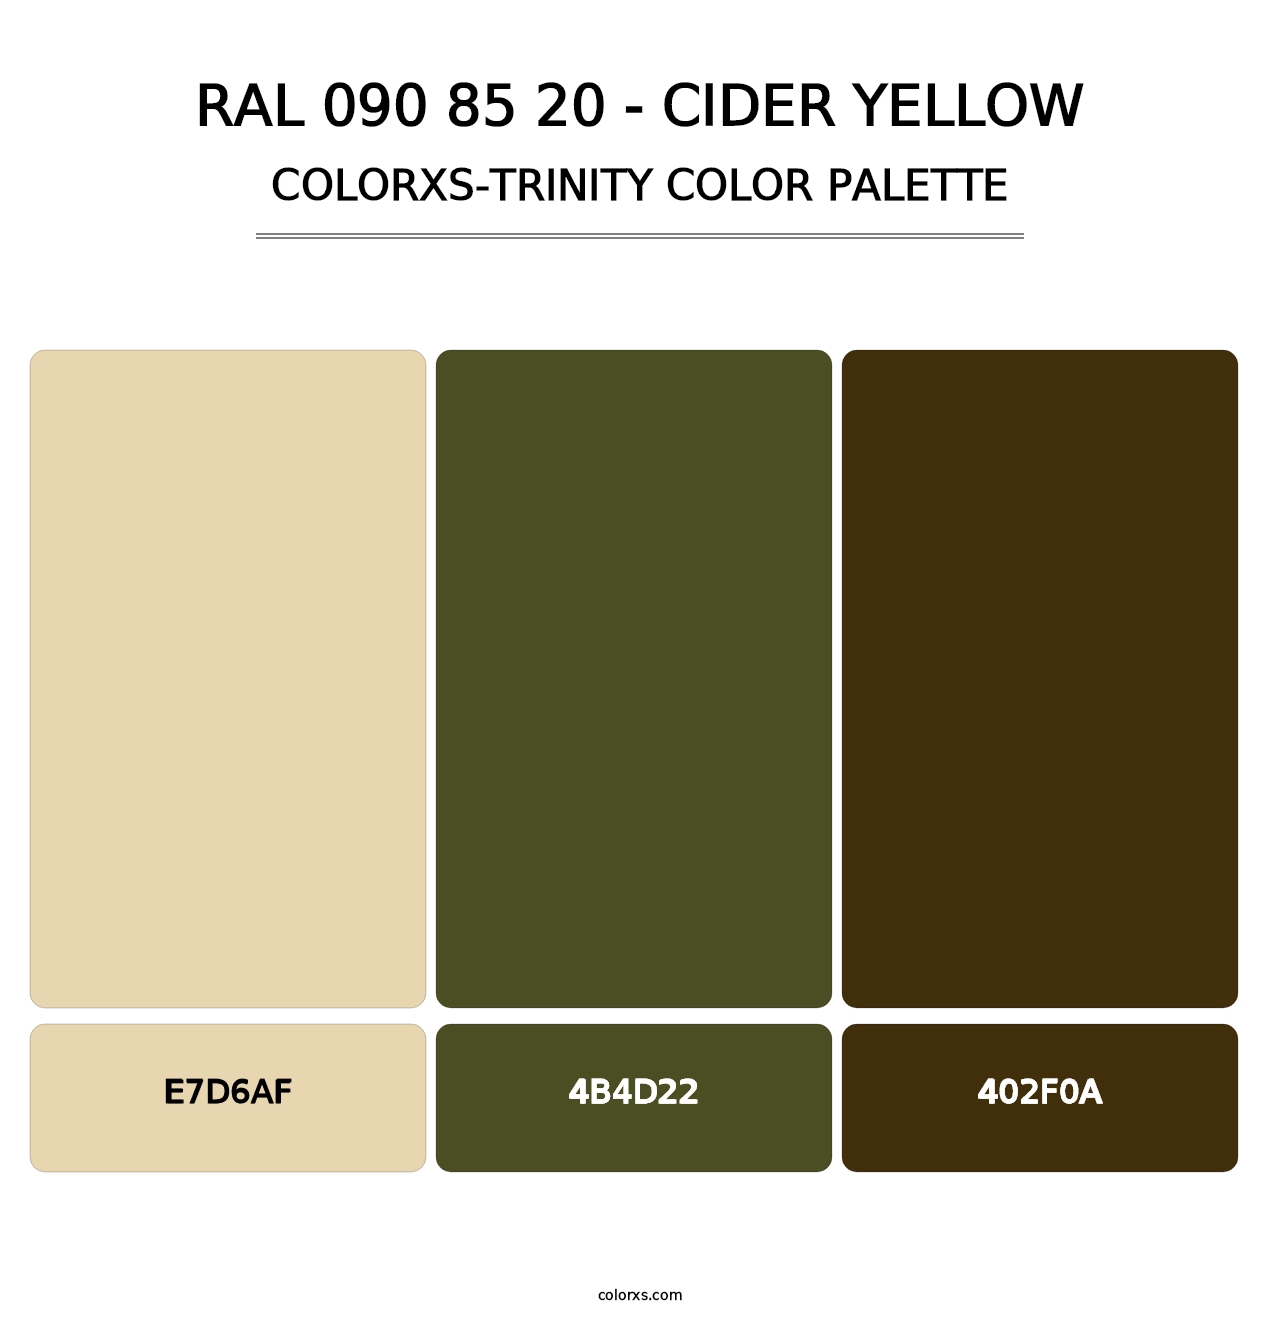 RAL 090 85 20 - Cider Yellow - Colorxs Trinity Palette